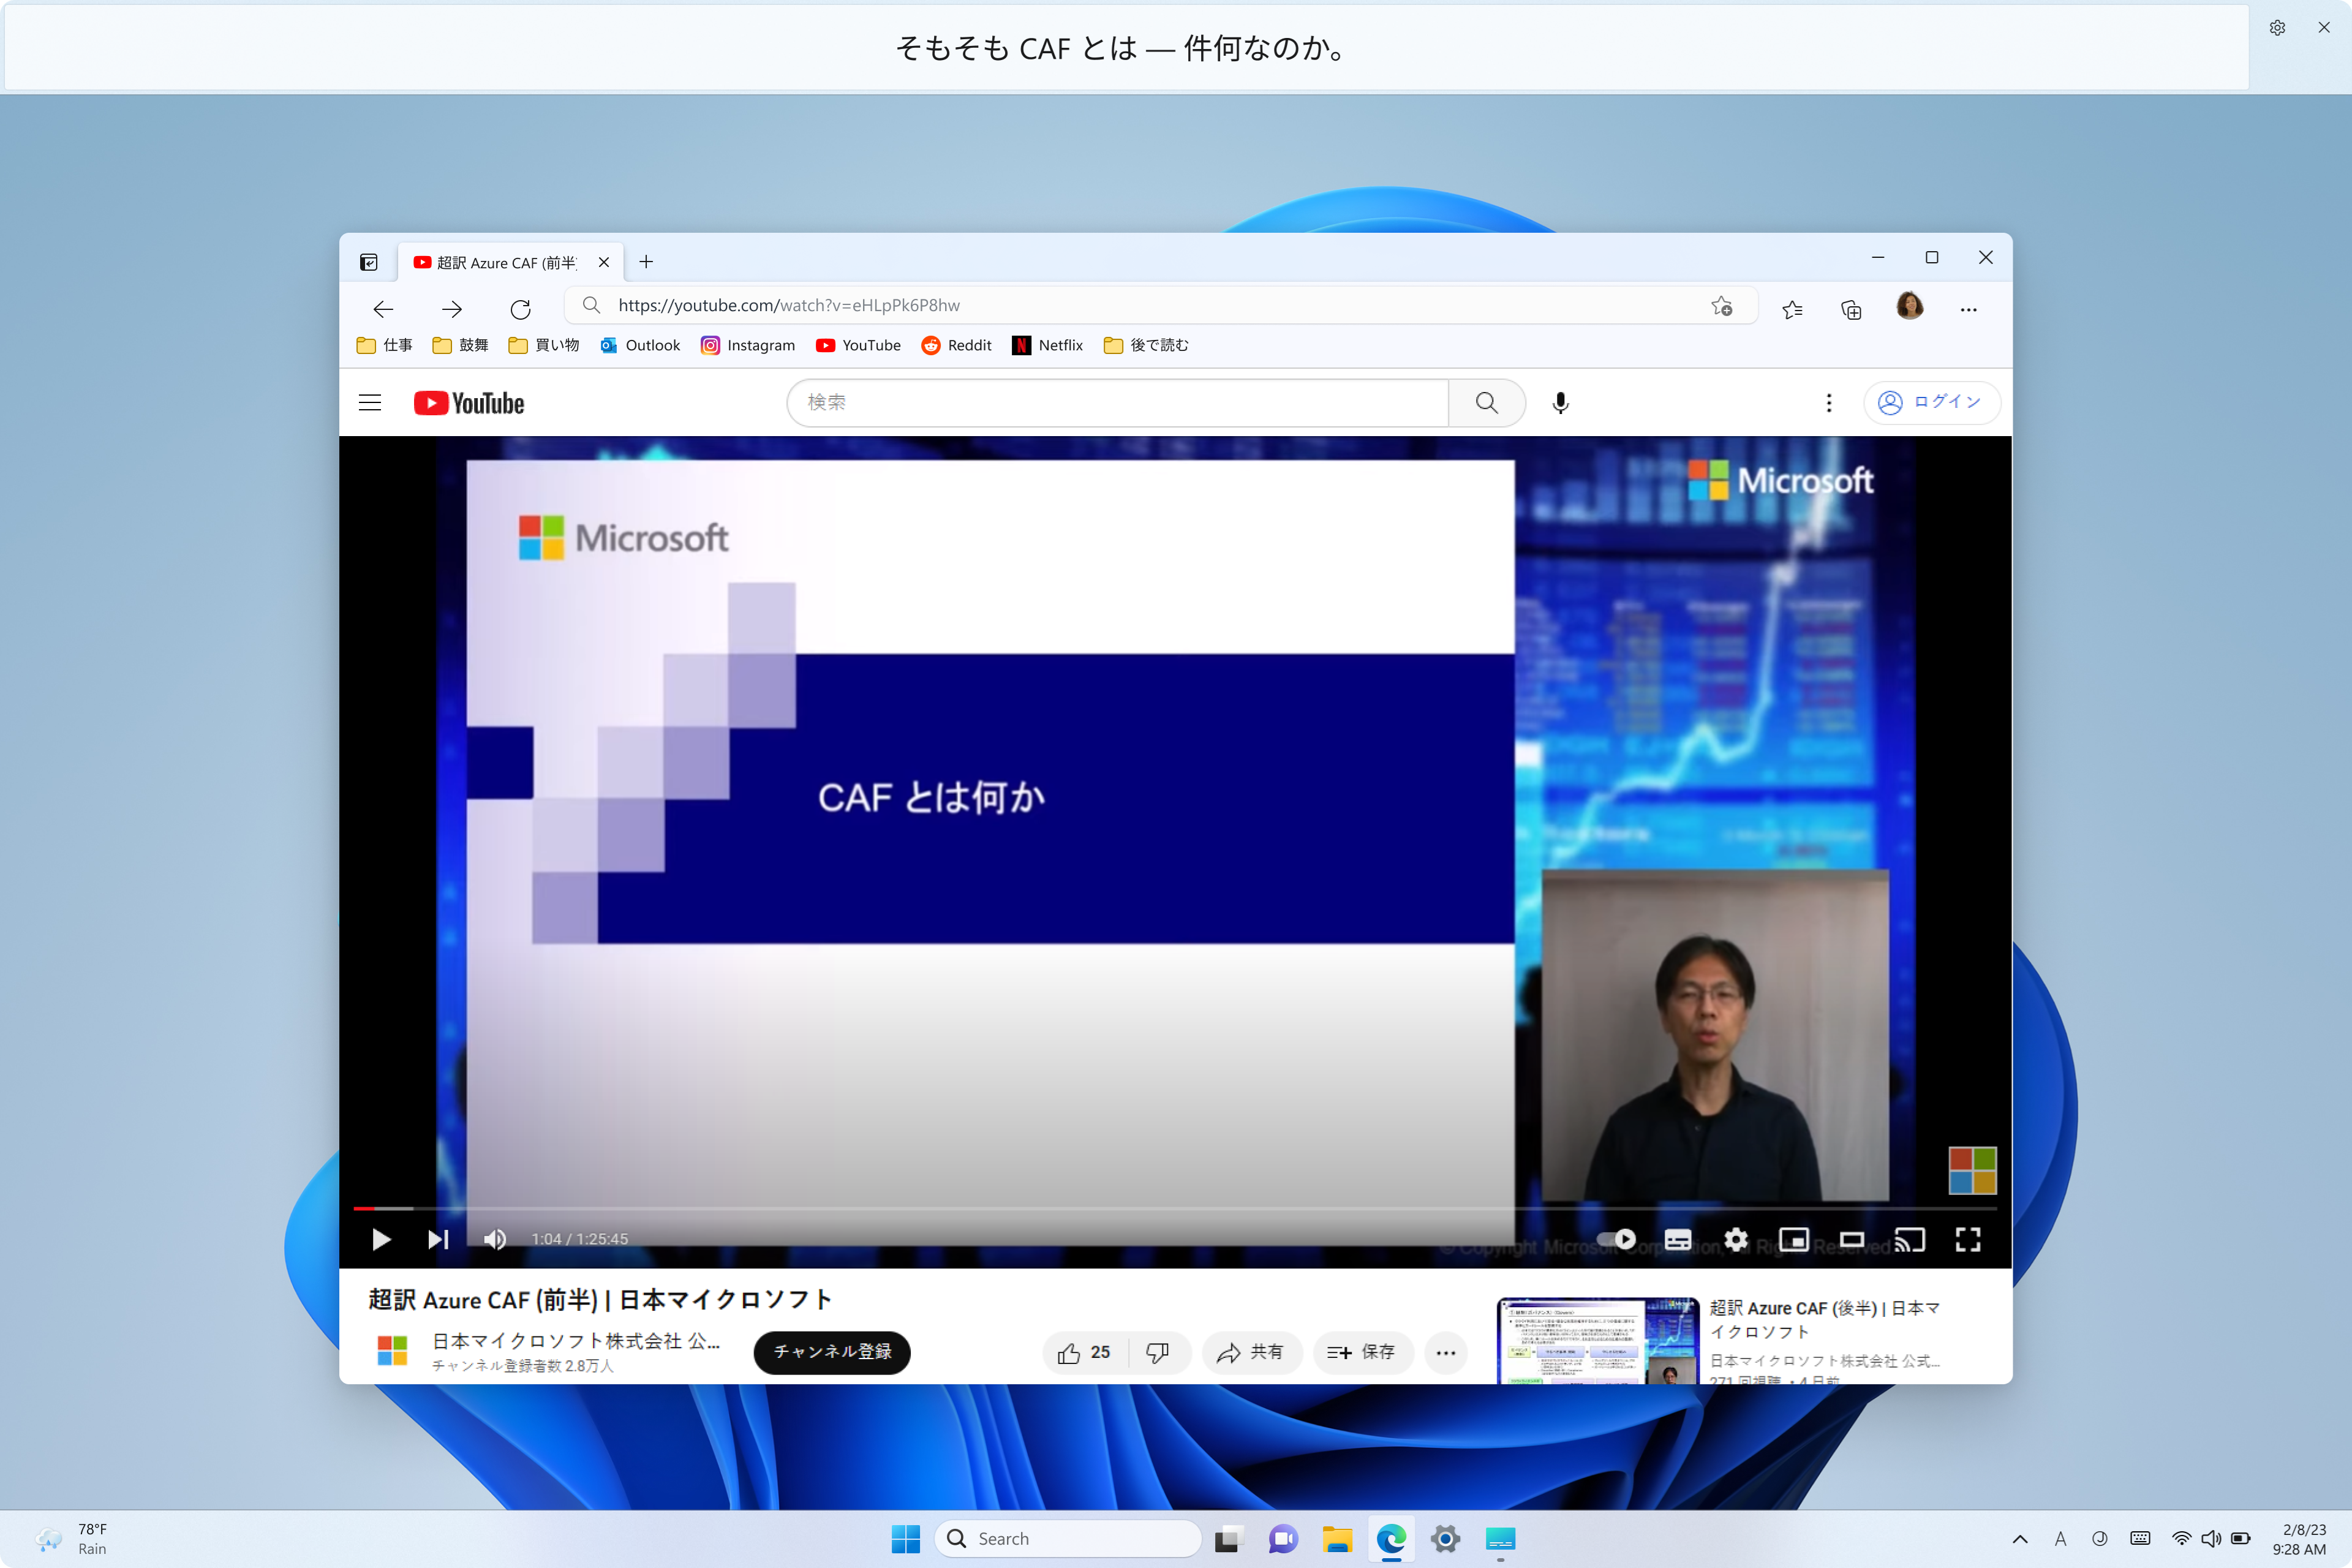 Screenshot of a Windows 11 desktop displaying live captions in Japanese at the top of the screen